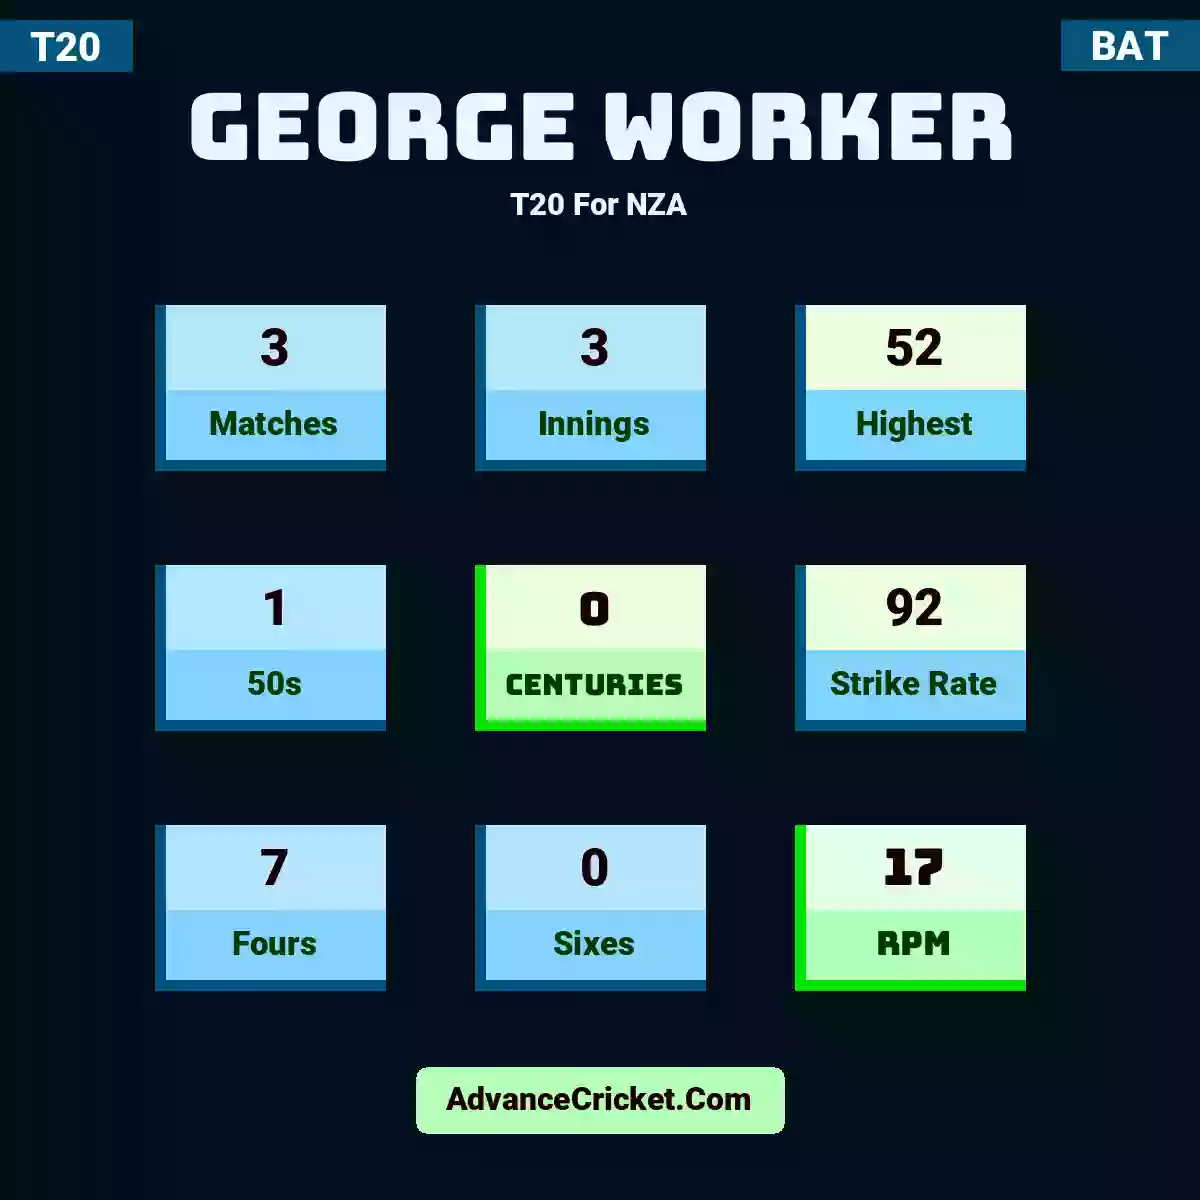 George Worker T20  For NZA, George Worker played 3 matches, scored 52 runs as highest, 1 half-centuries, and 0 centuries, with a strike rate of 92. G.Worker hit 7 fours and 0 sixes, with an RPM of 17.